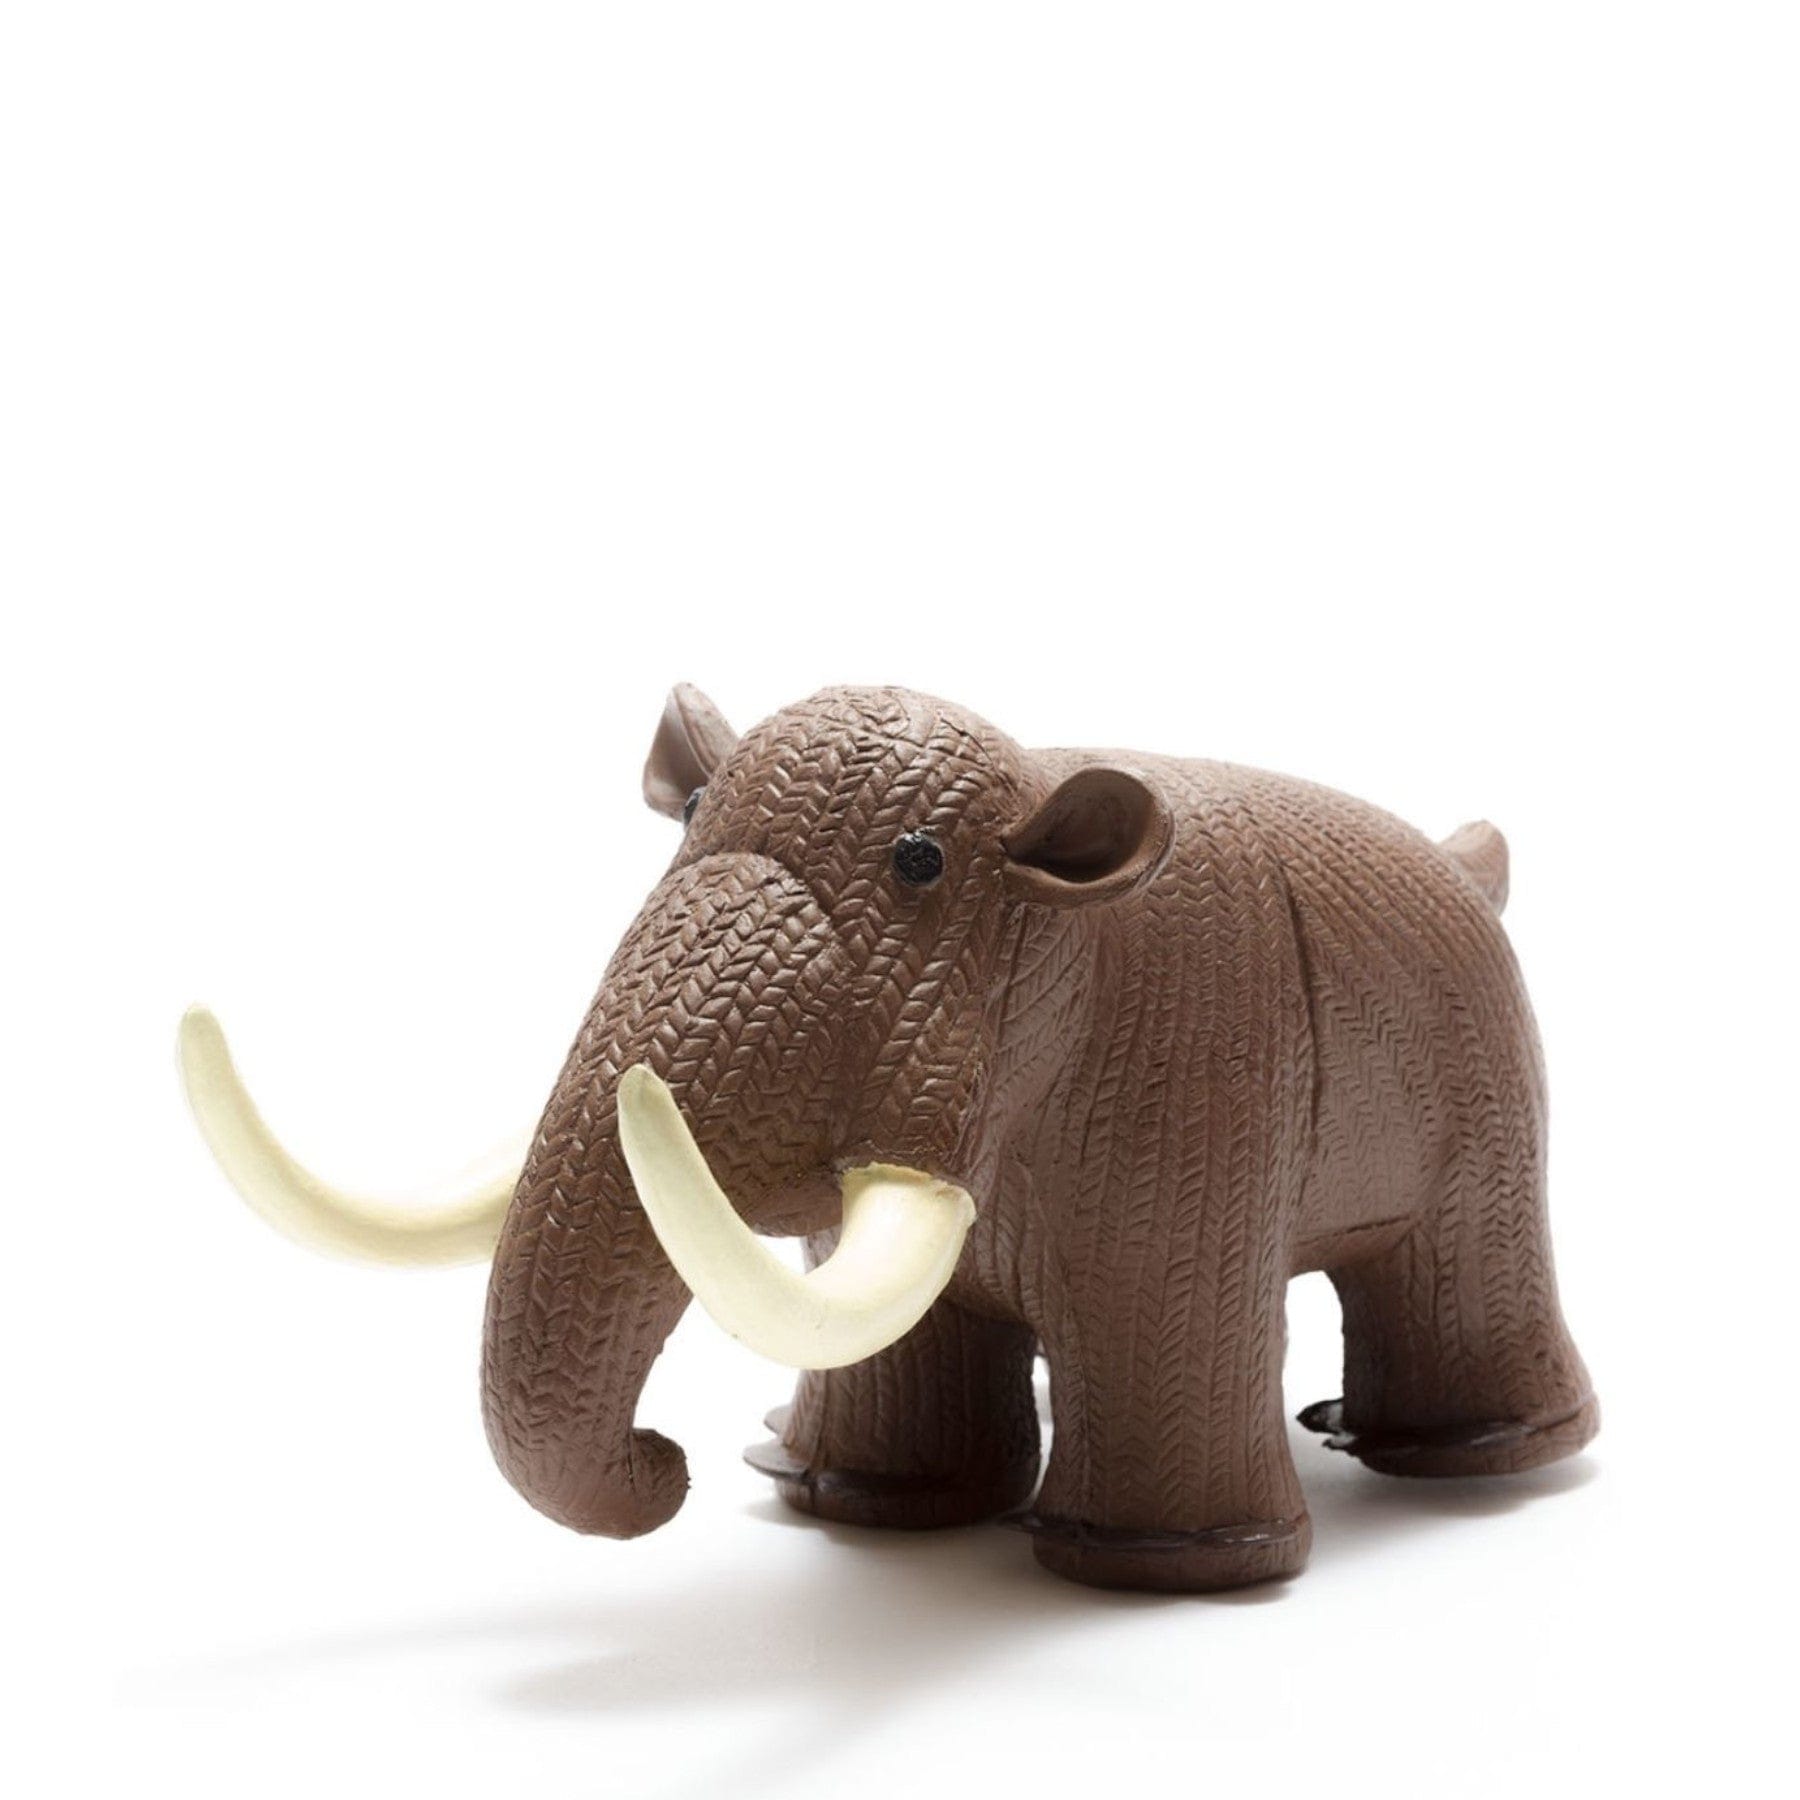 Brown toy elephant with ivory tusks on white background